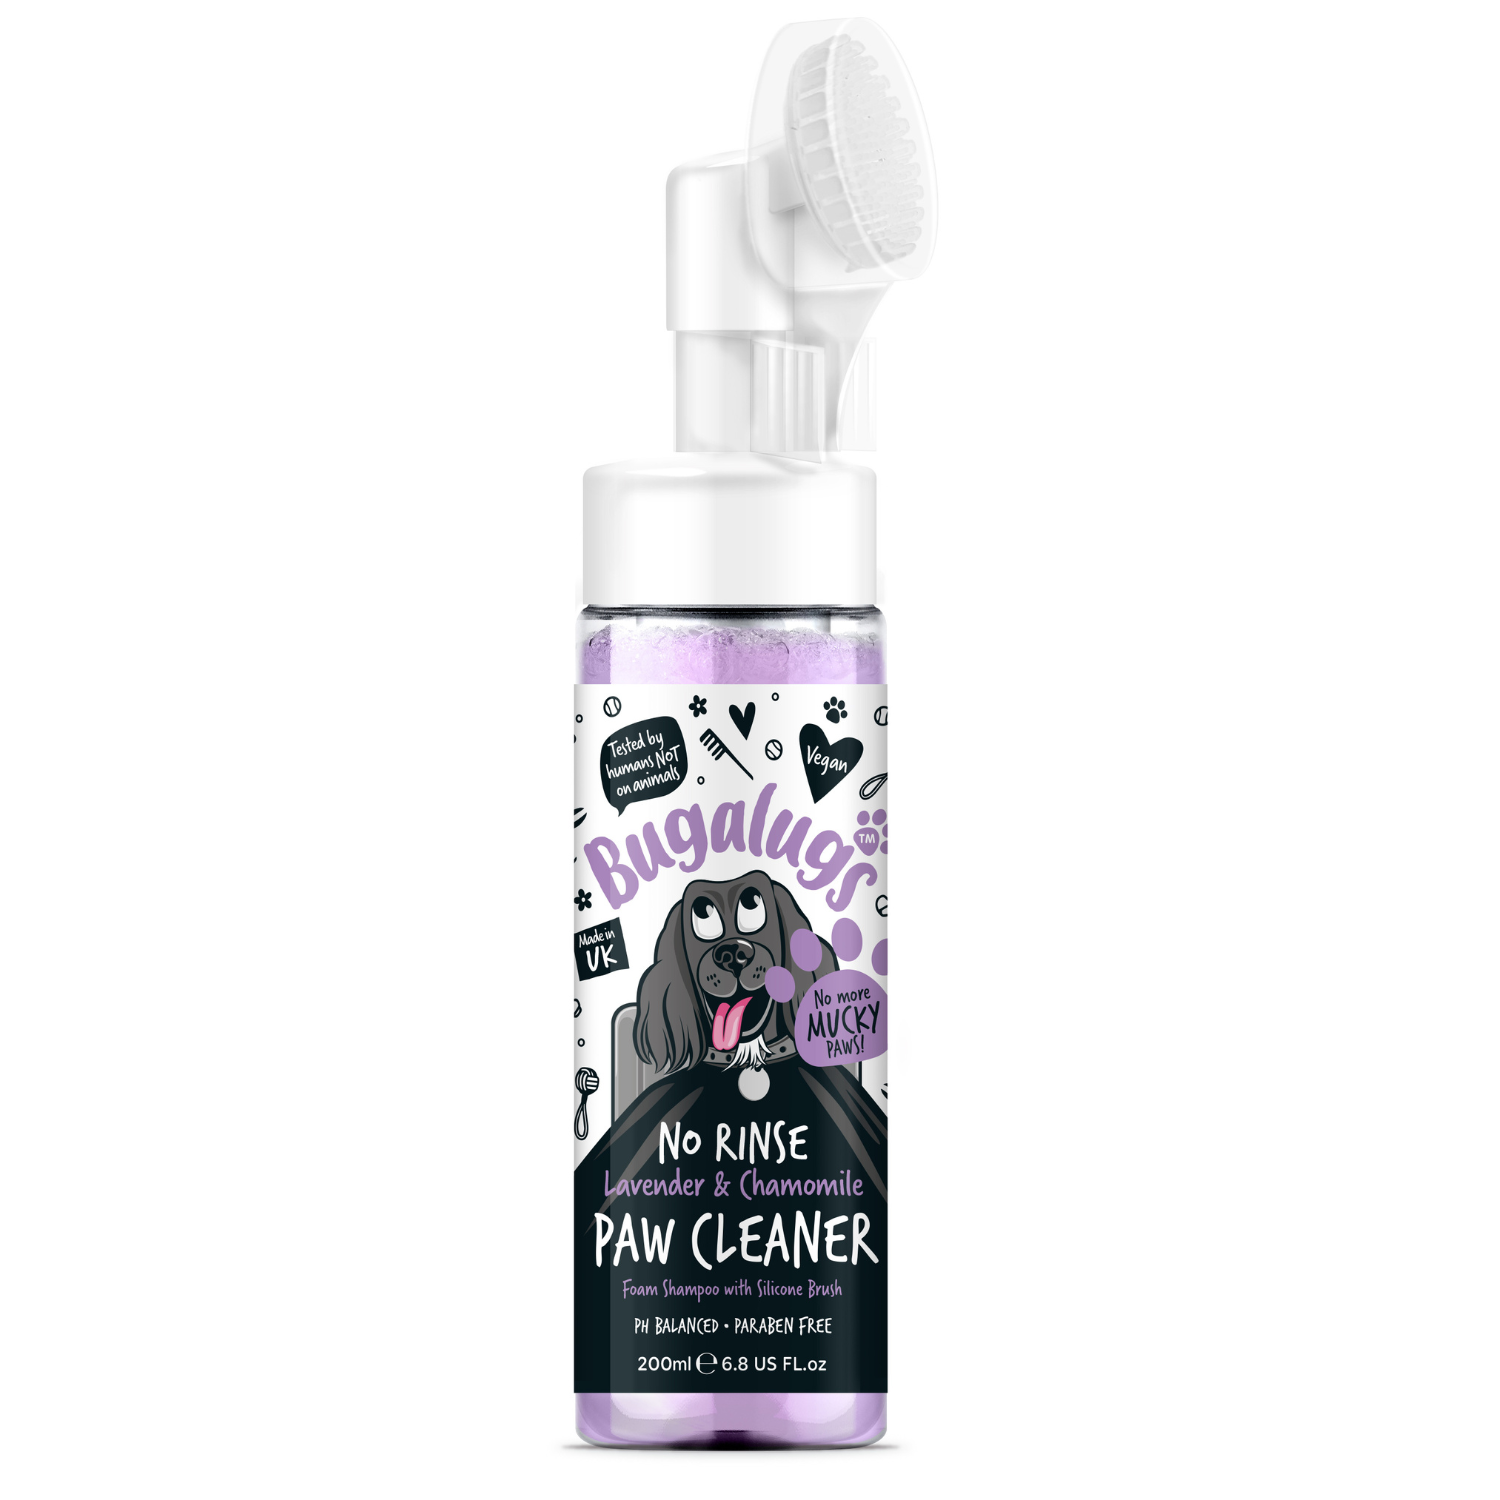 Bugalugs No Rinse Lavender and Chamomile Paw Cleaner - Foam Shampoo with Silicone Brush - For Cats and Dogs